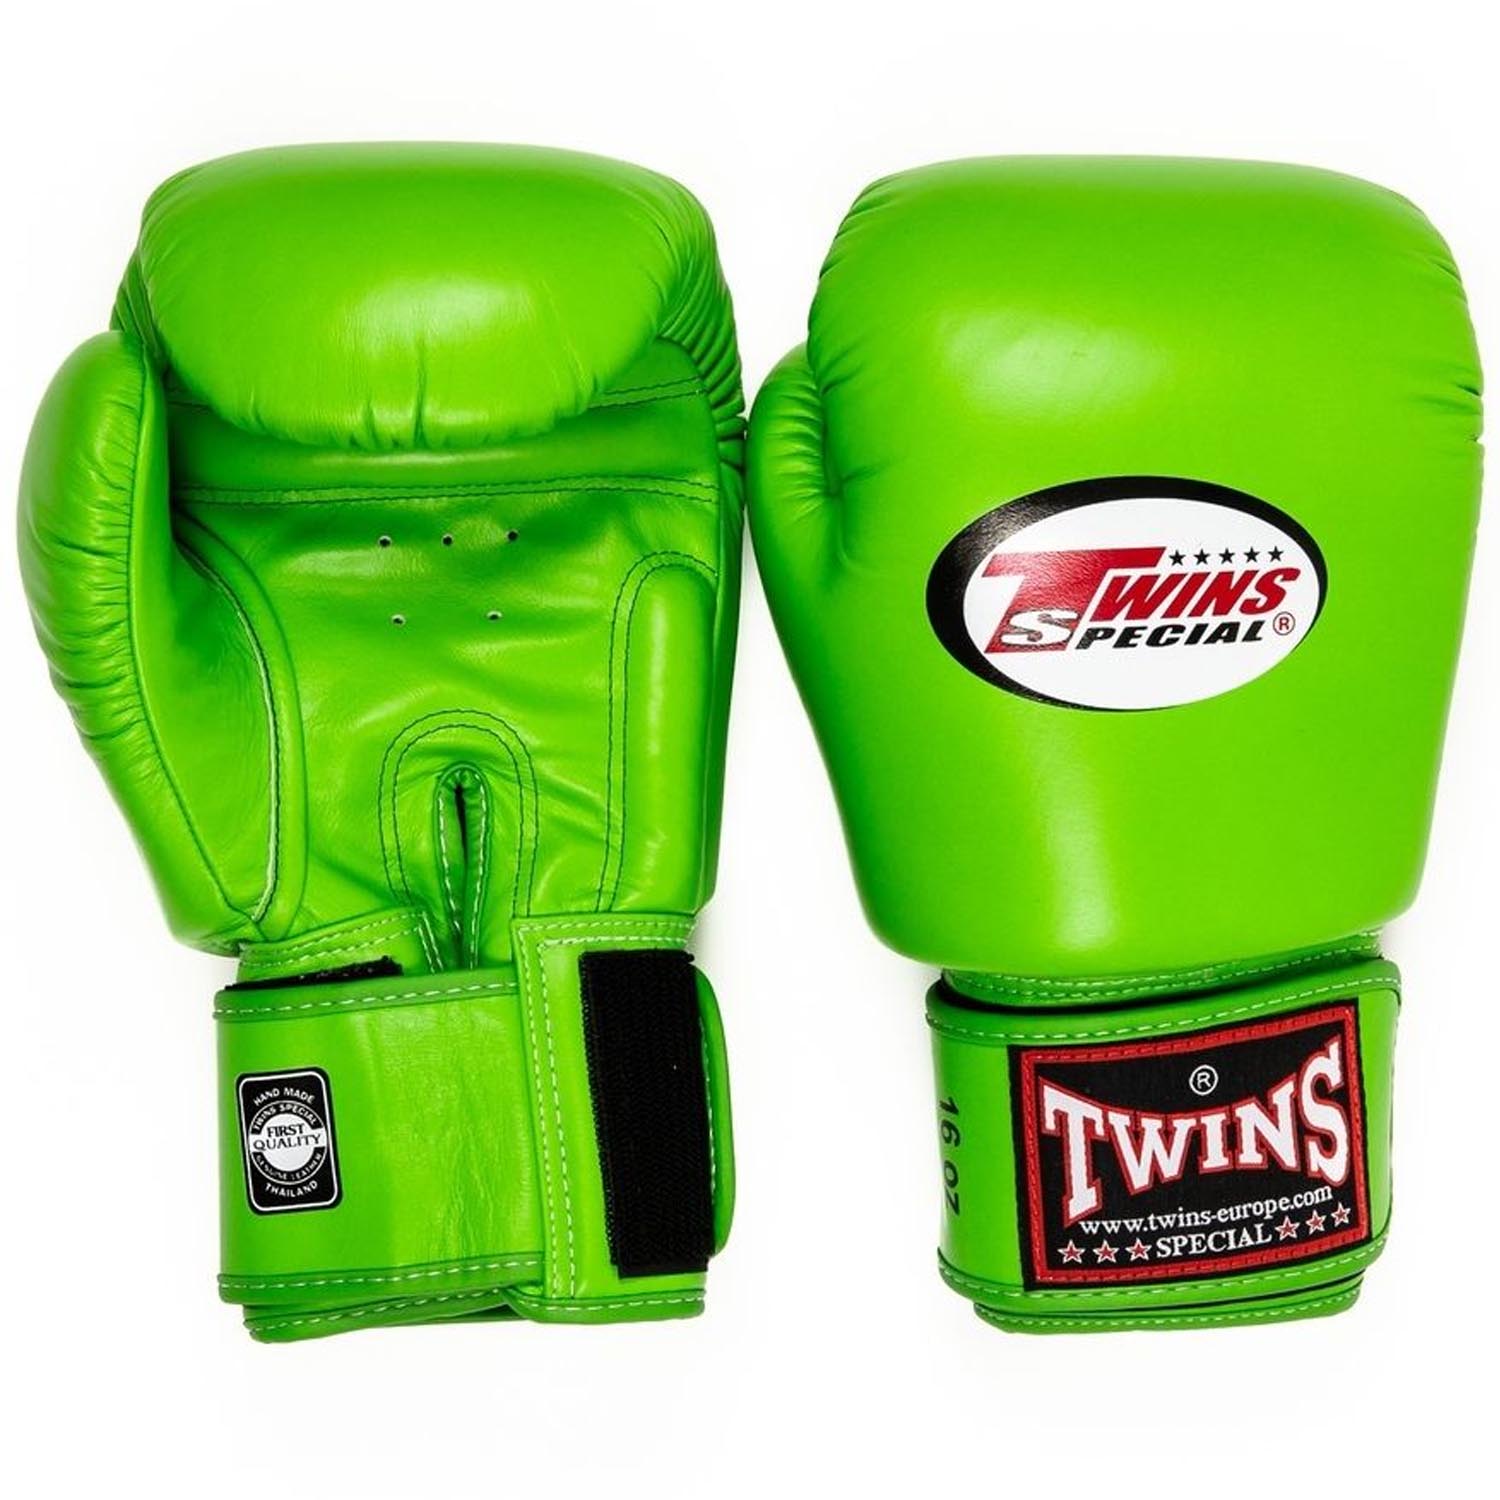 TWINS Special Boxing Gloves, BGBL3, lime, 12 Oz